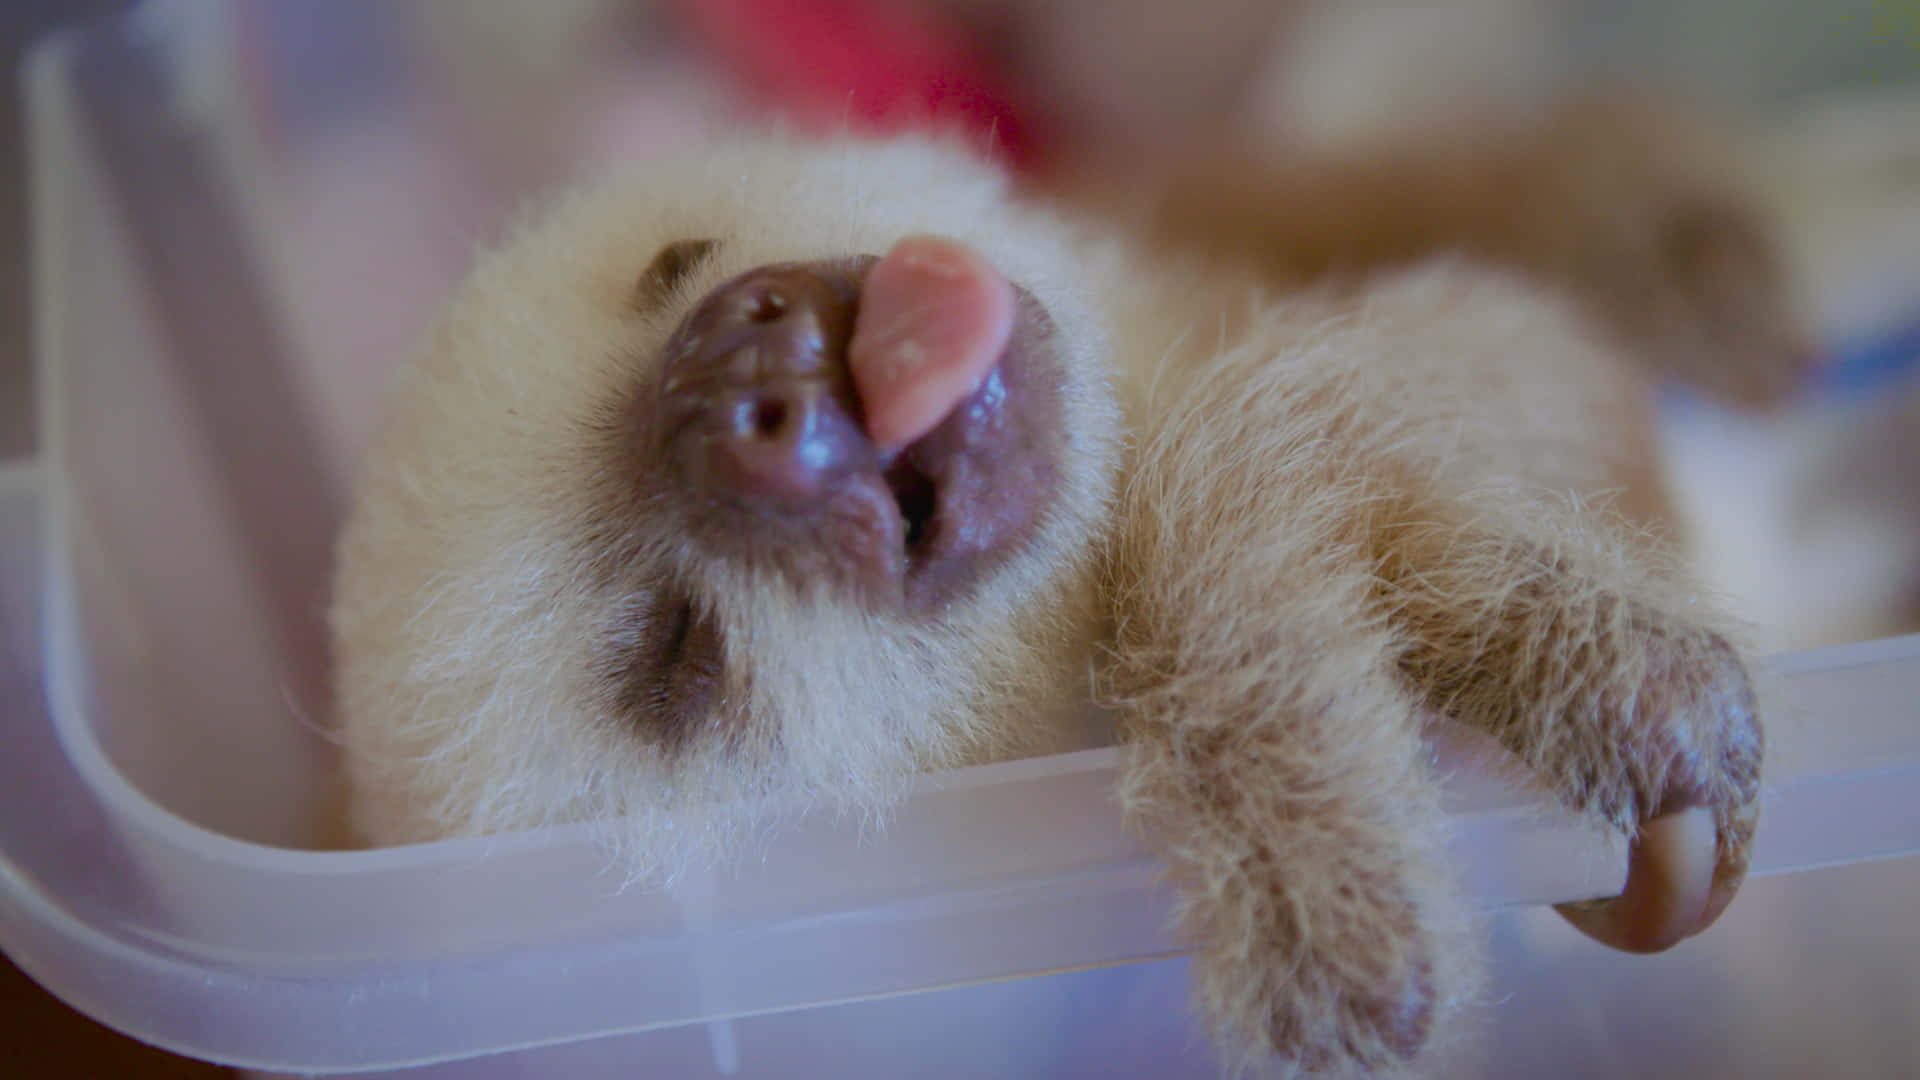 Cute Sloth Sleeping Tongue Out Picture